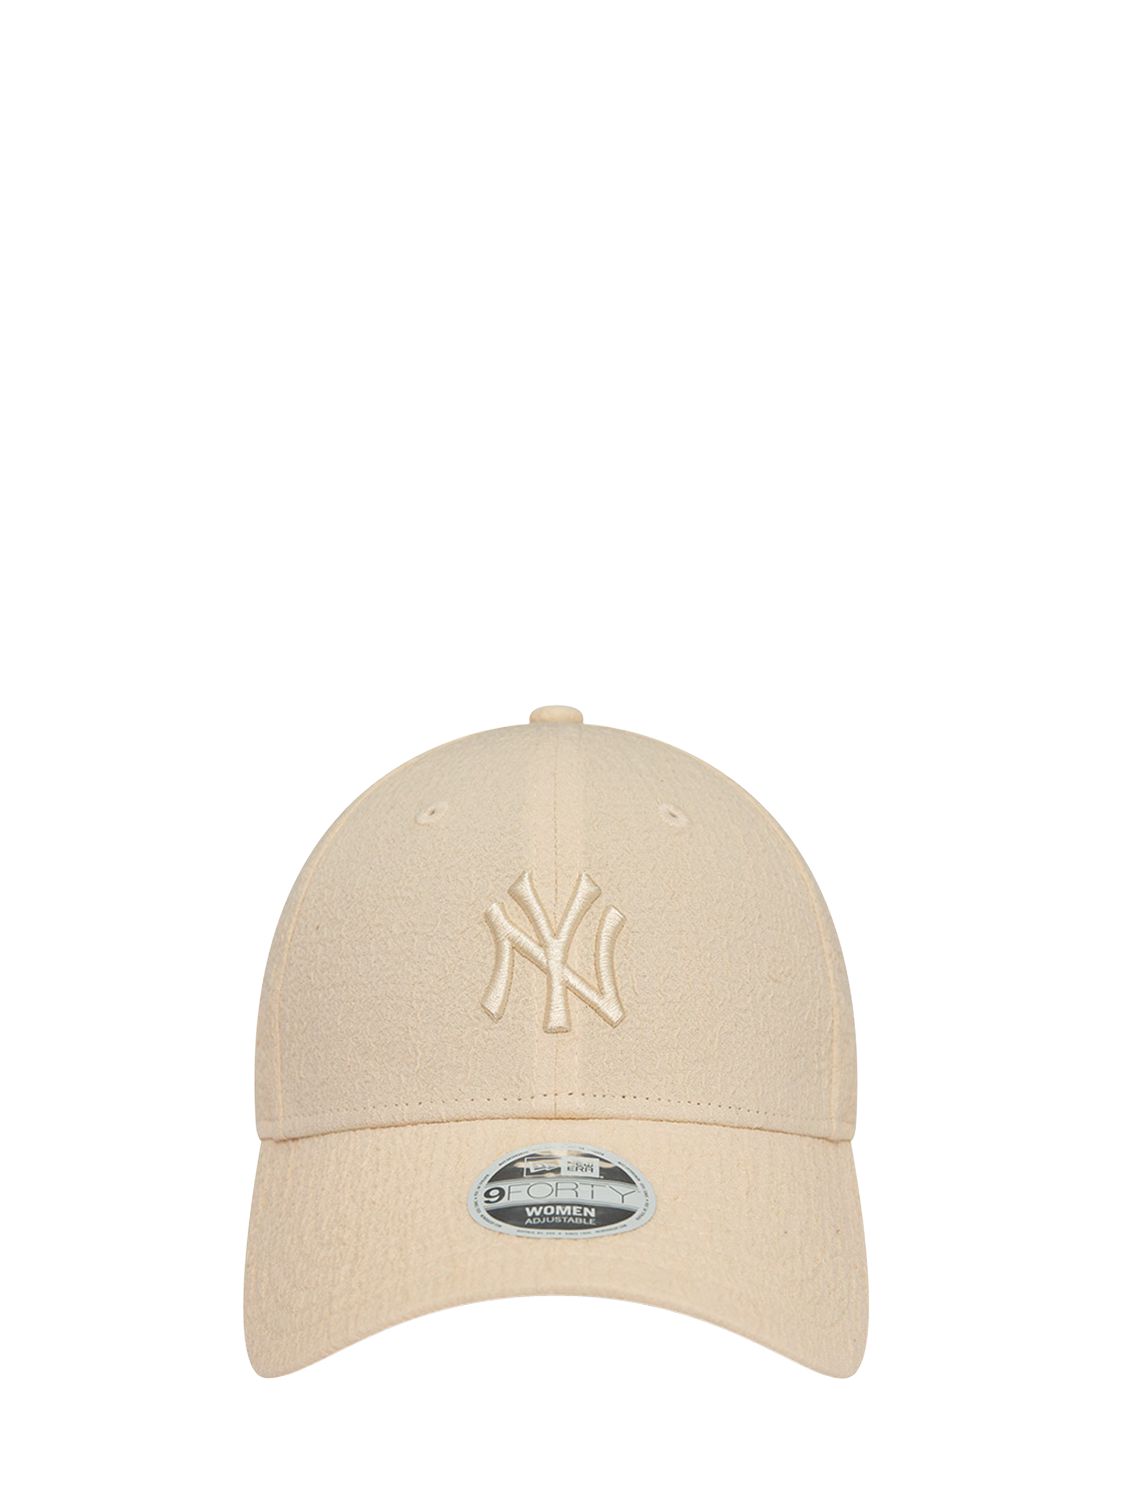 New Era Ny Yankees Bubble Stitch 9forty Hat In Beige